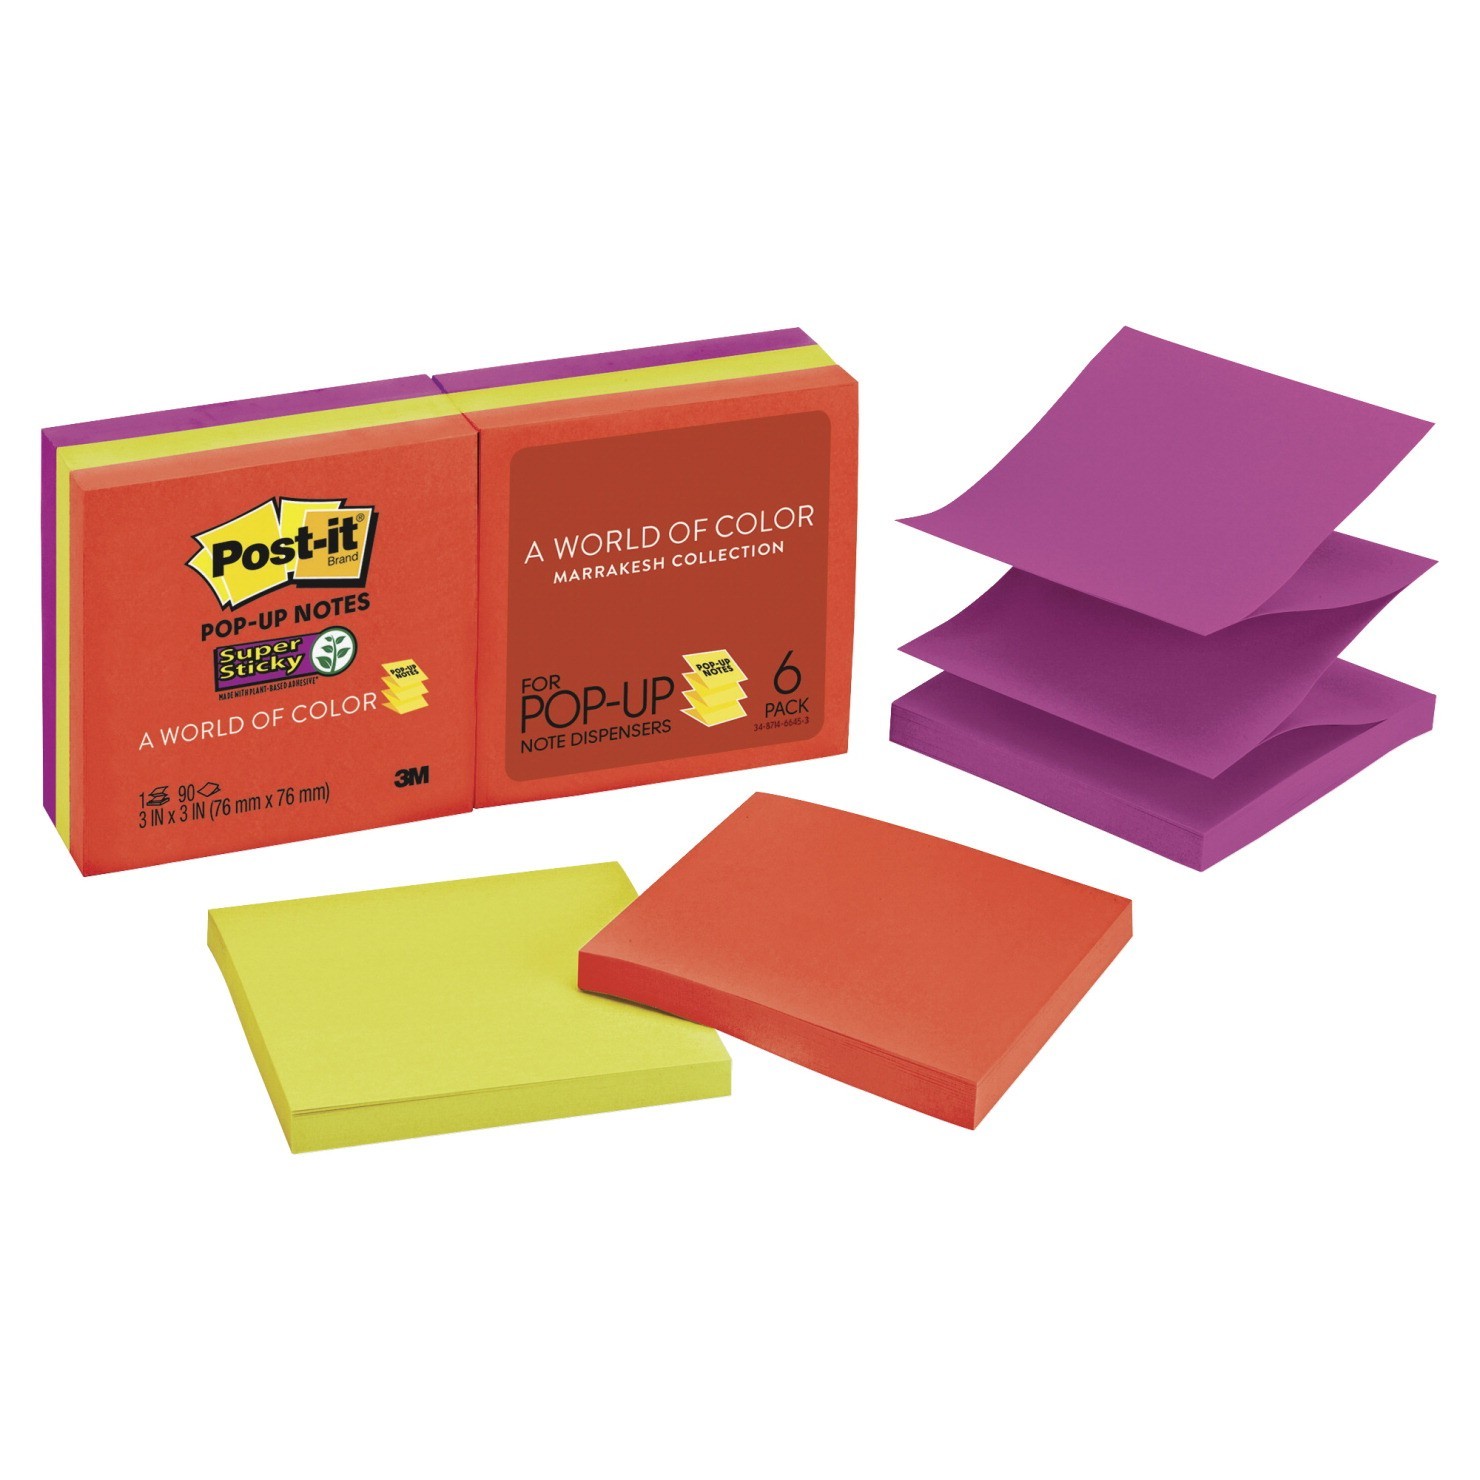 3 X 3 in, Post-it Pop-Up Super Sticky Note Refill, Assorted Neon Color, 90 Sheets/Pad, Pack of 6